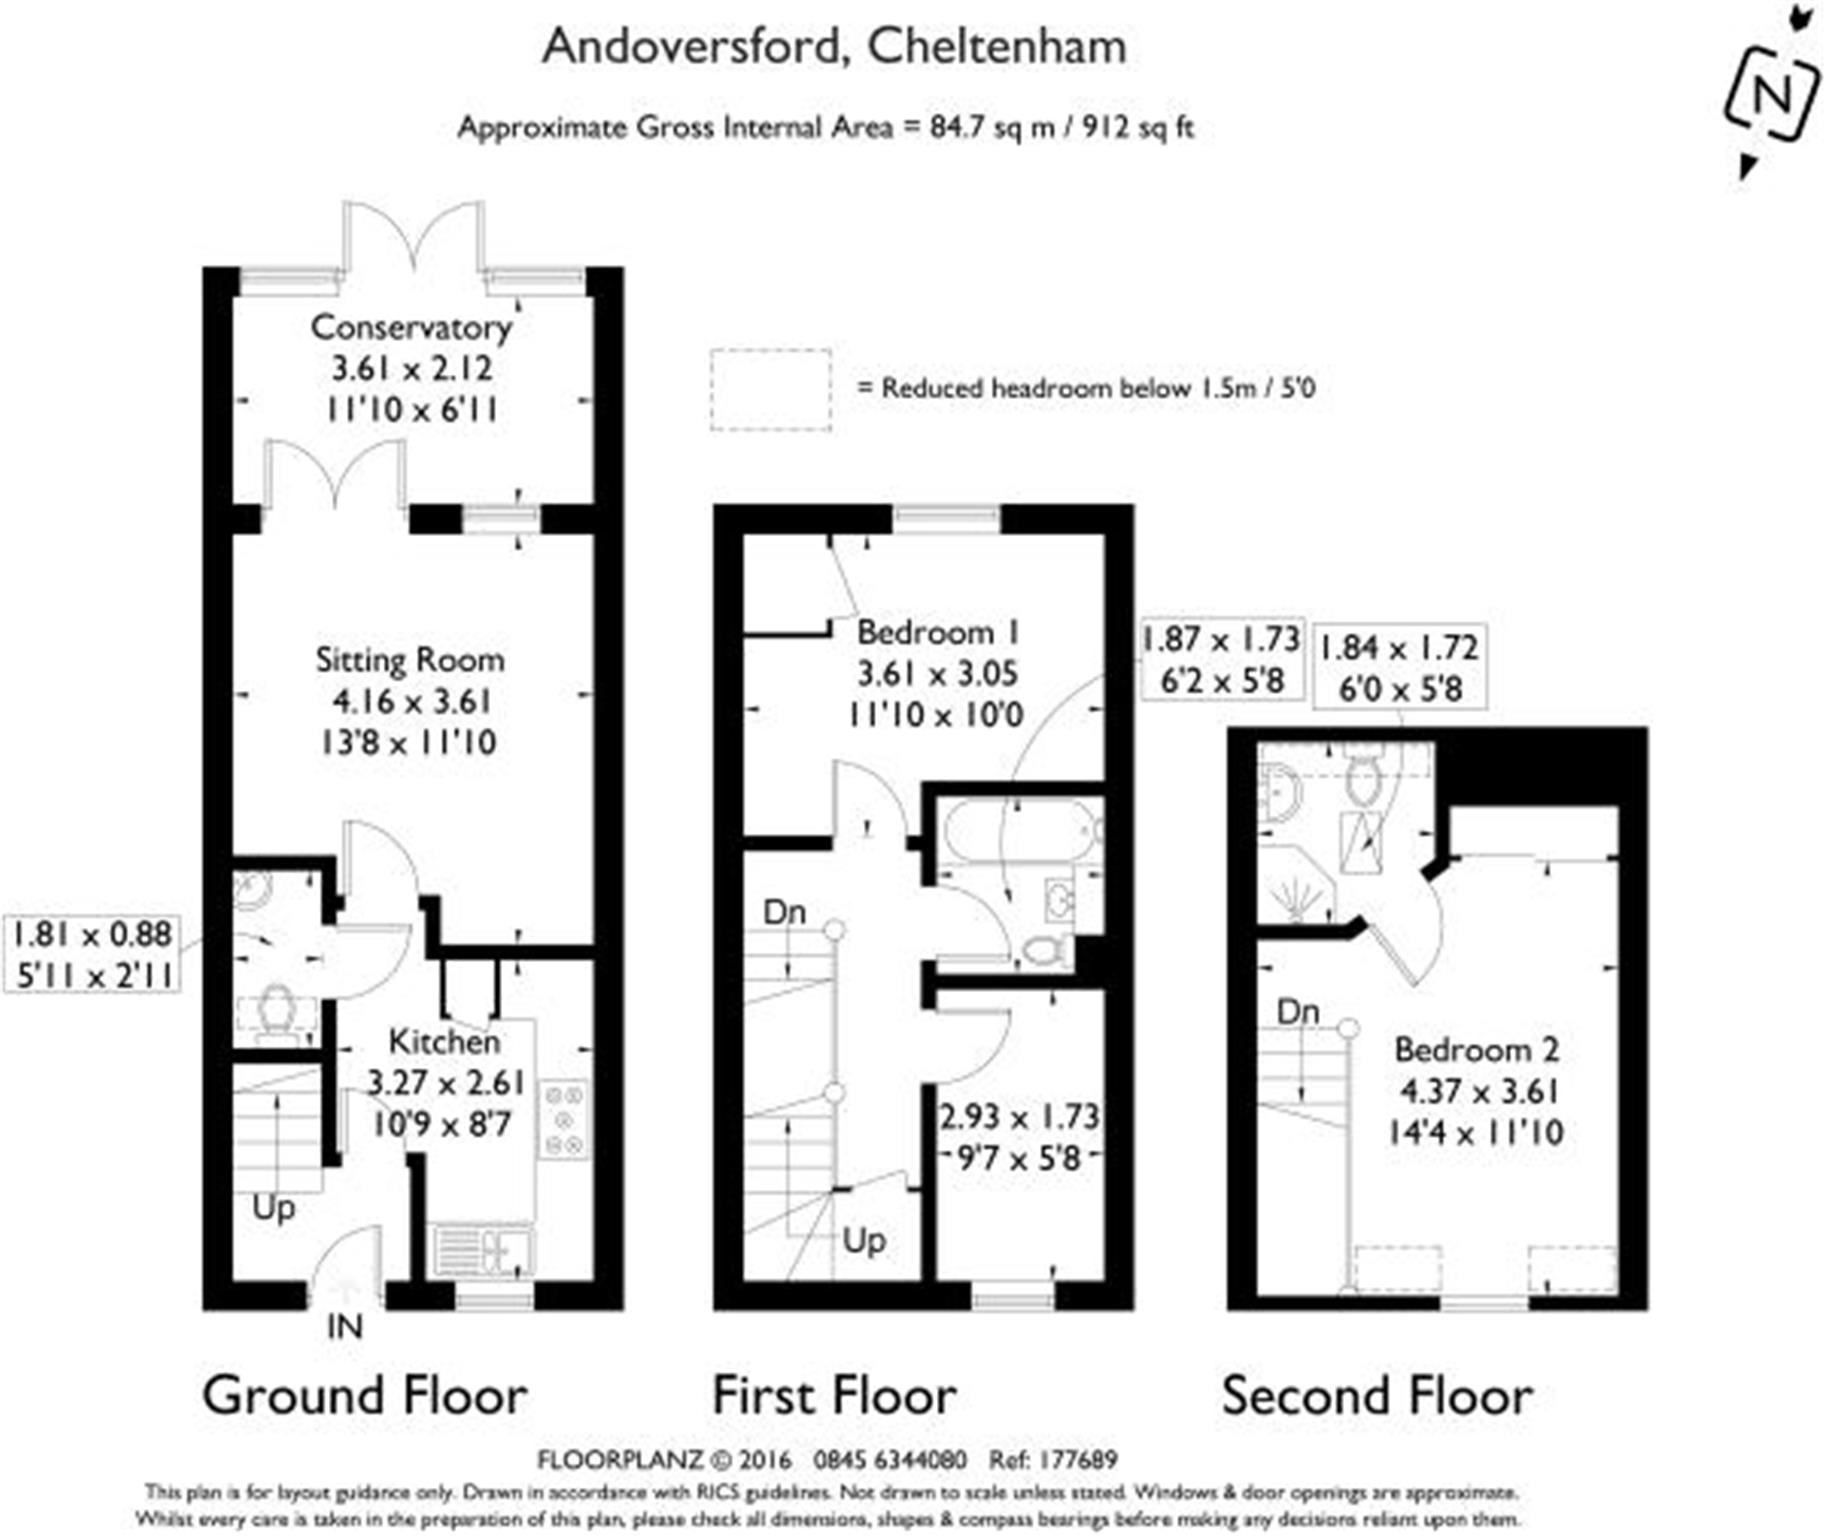 3 Bedrooms Terraced house for sale in Coln Gardens, Andoversford, Cheltenham, Glos GL54